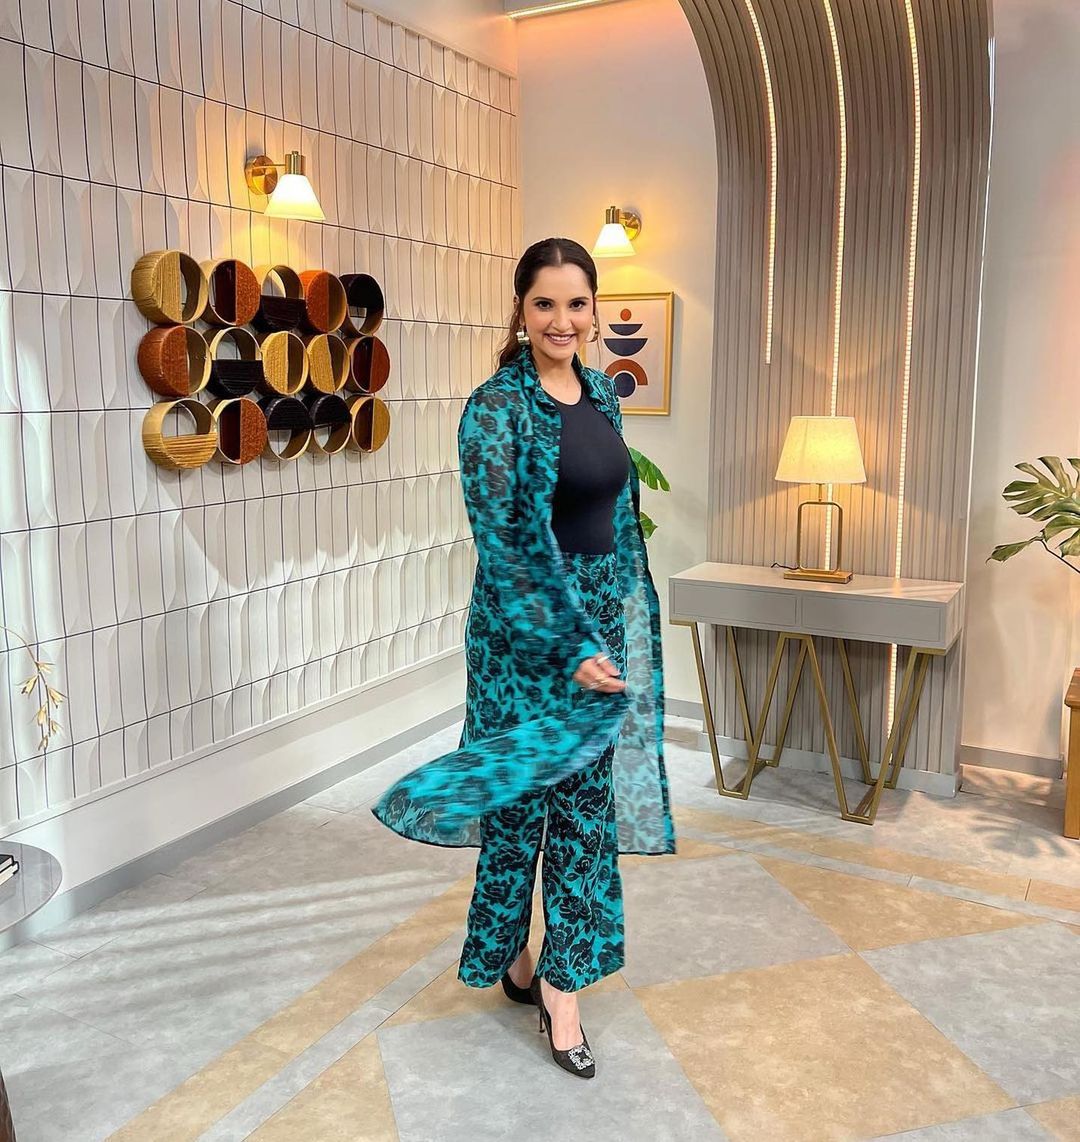 What’s so special about sania mirza wearing a Floral print cord set from Shaberry